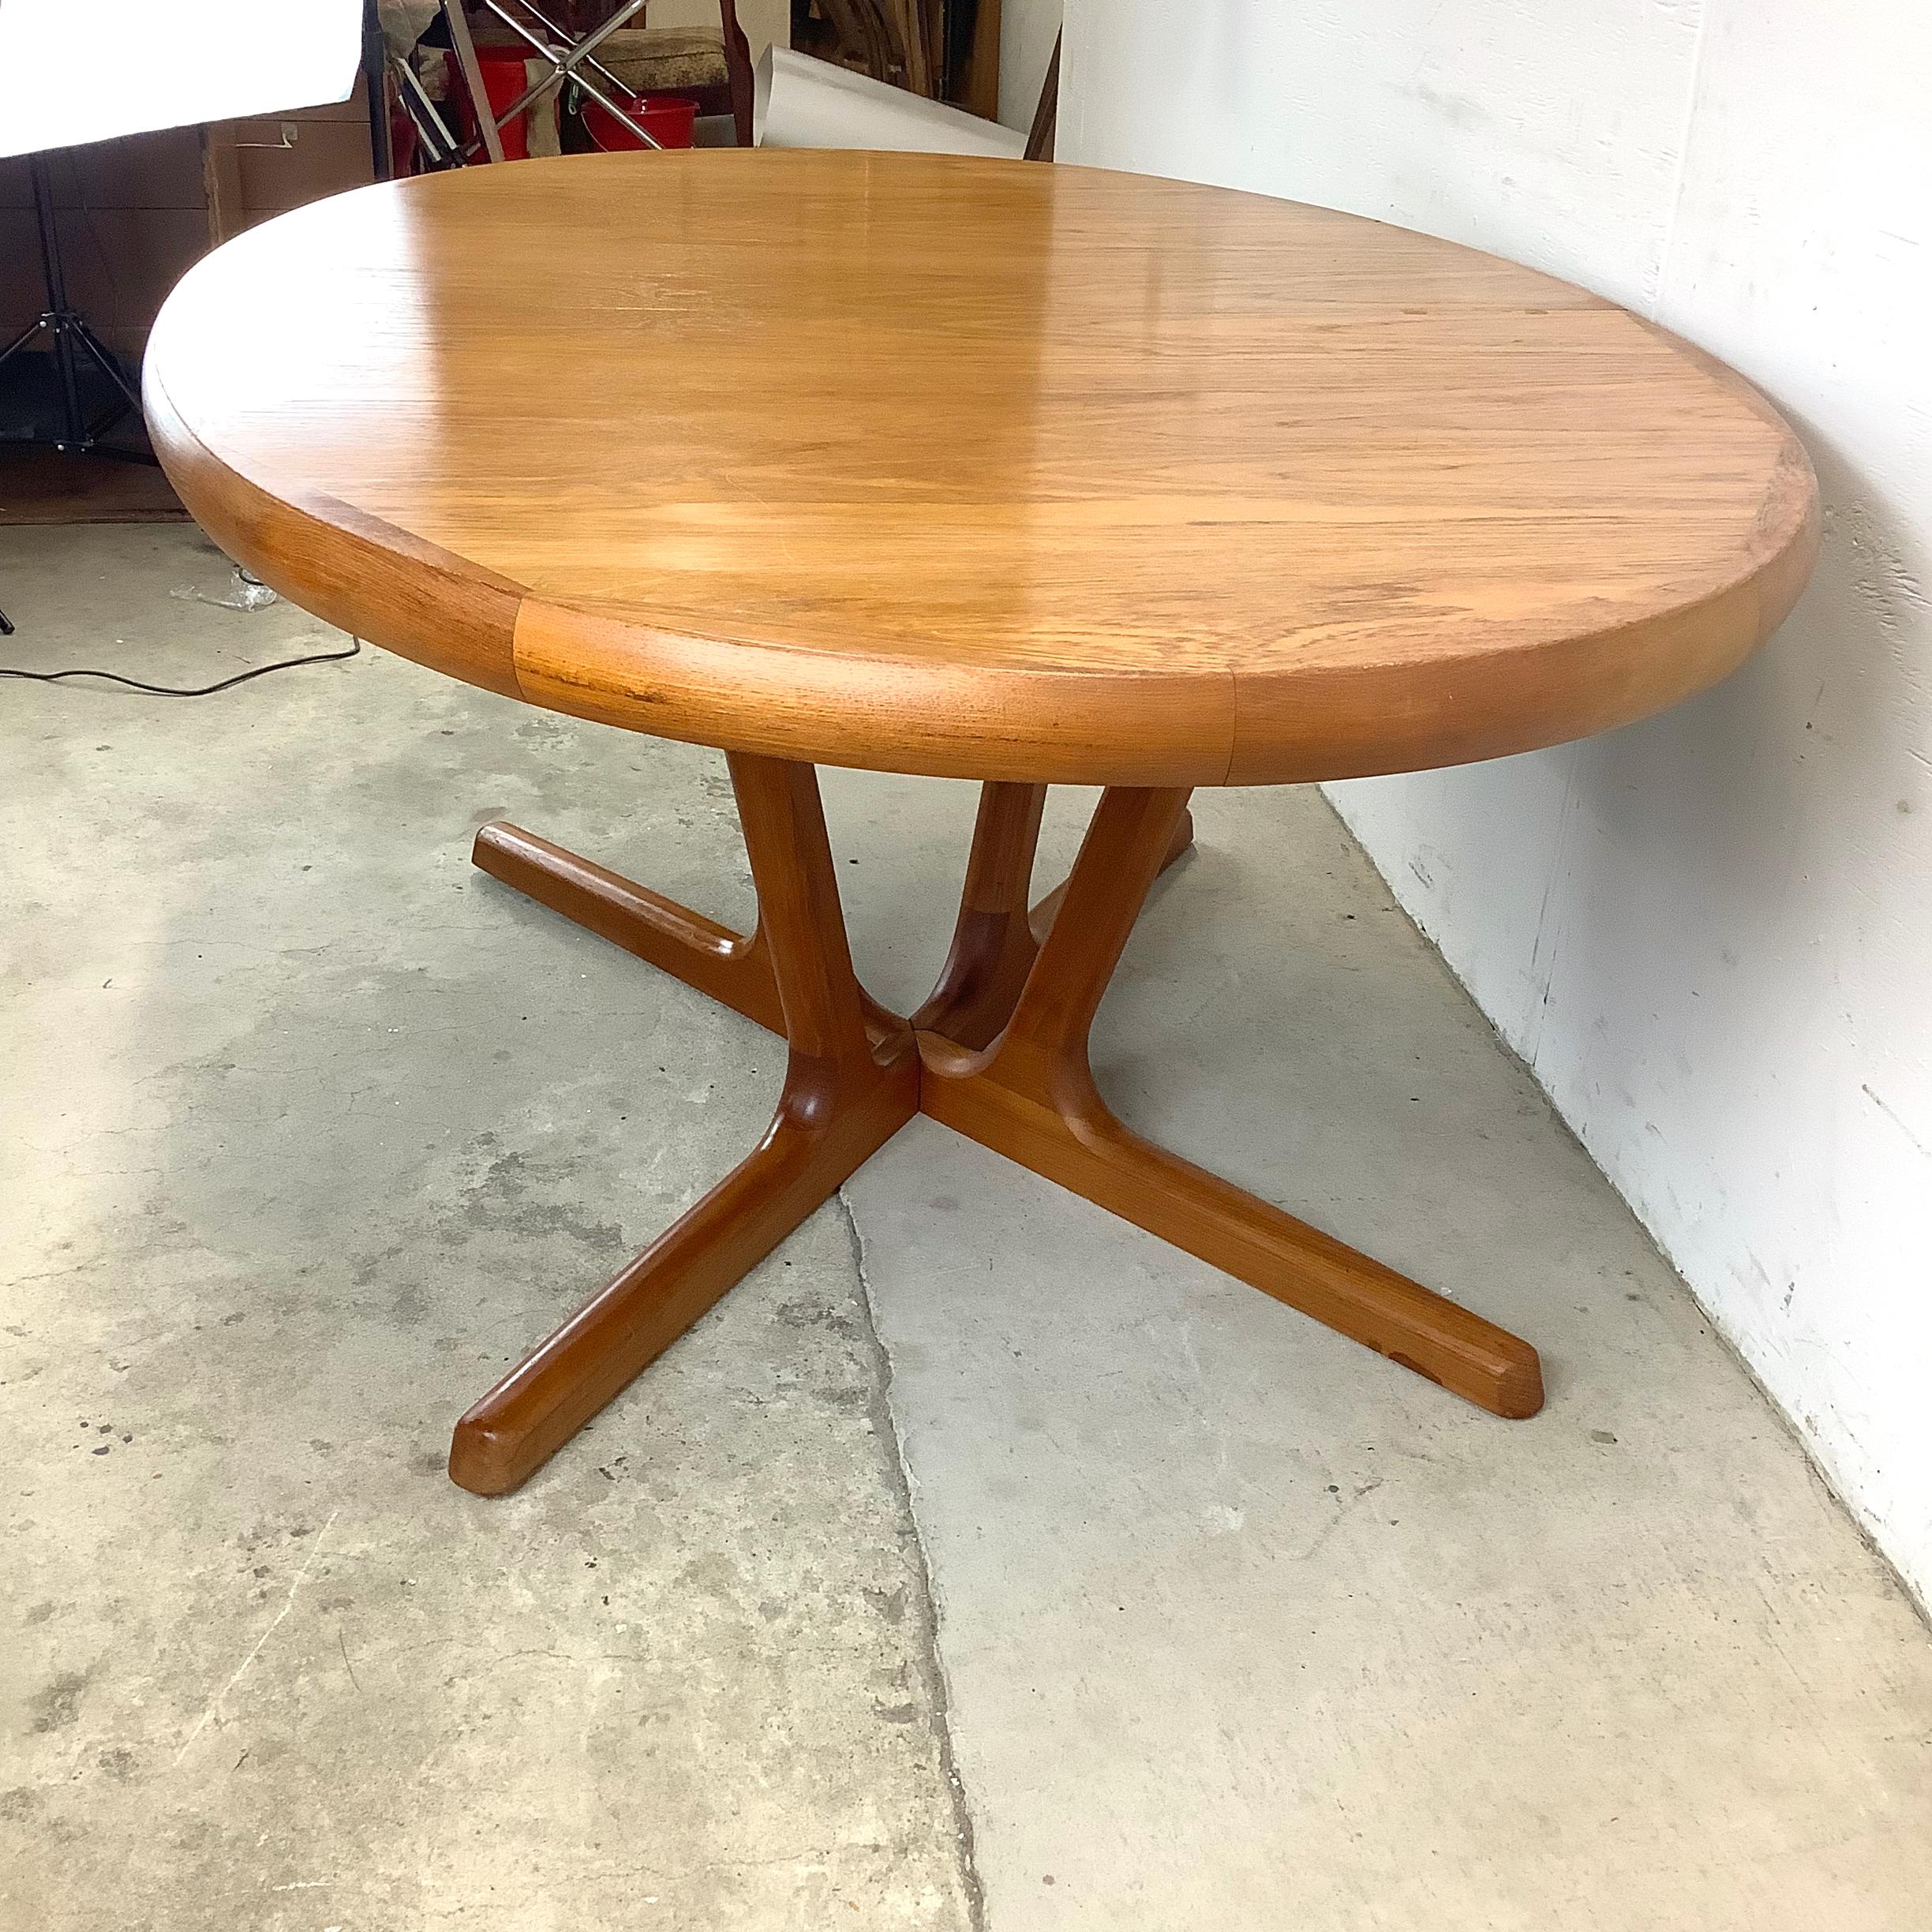 20th Century Scandinavian Modern Teak Oval Dining Table With Leaves For Sale